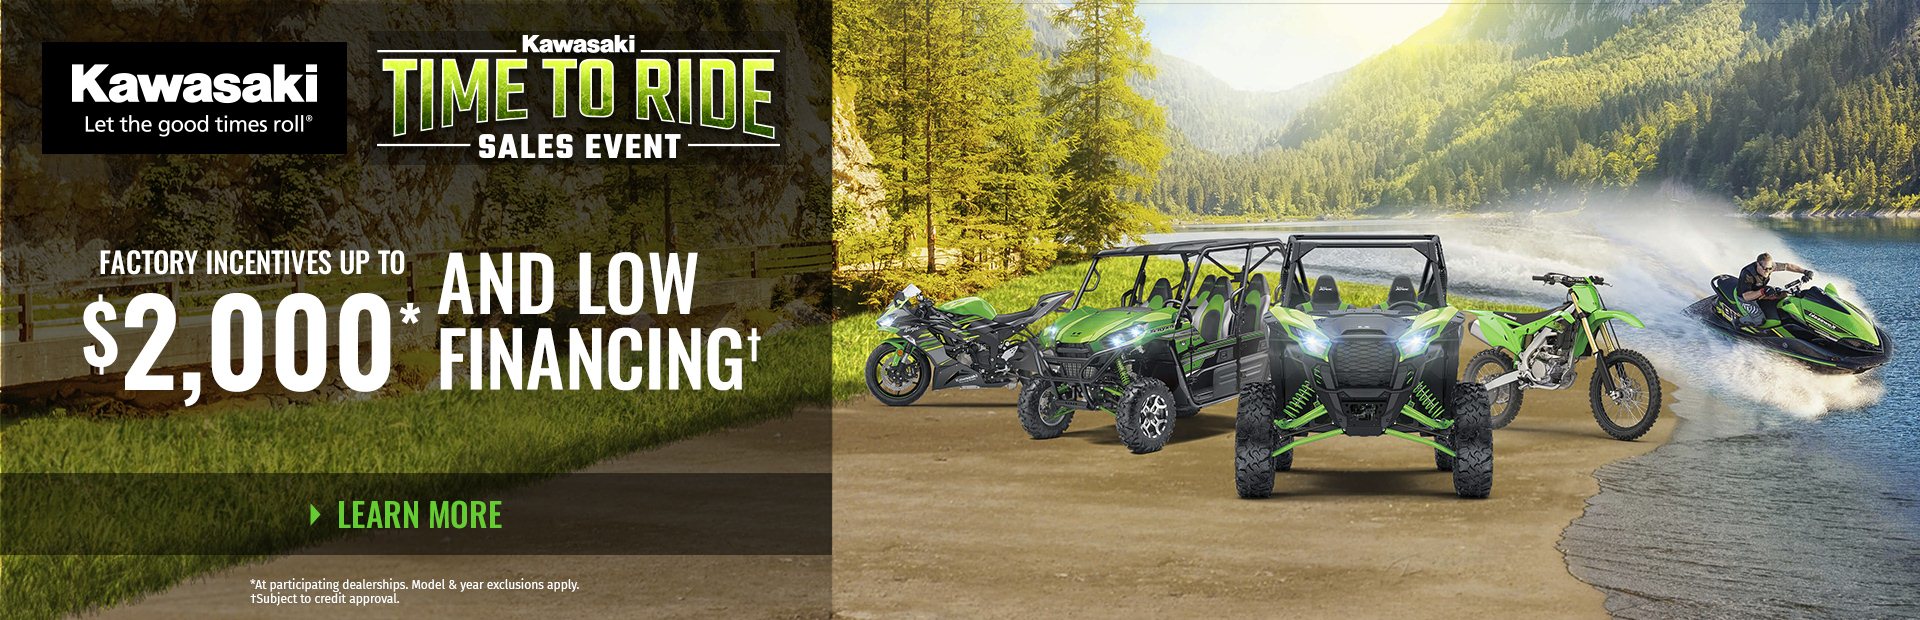 Time To Ride Sales Event at Lynnwood Motoplex, Lynnwood, WA 98037